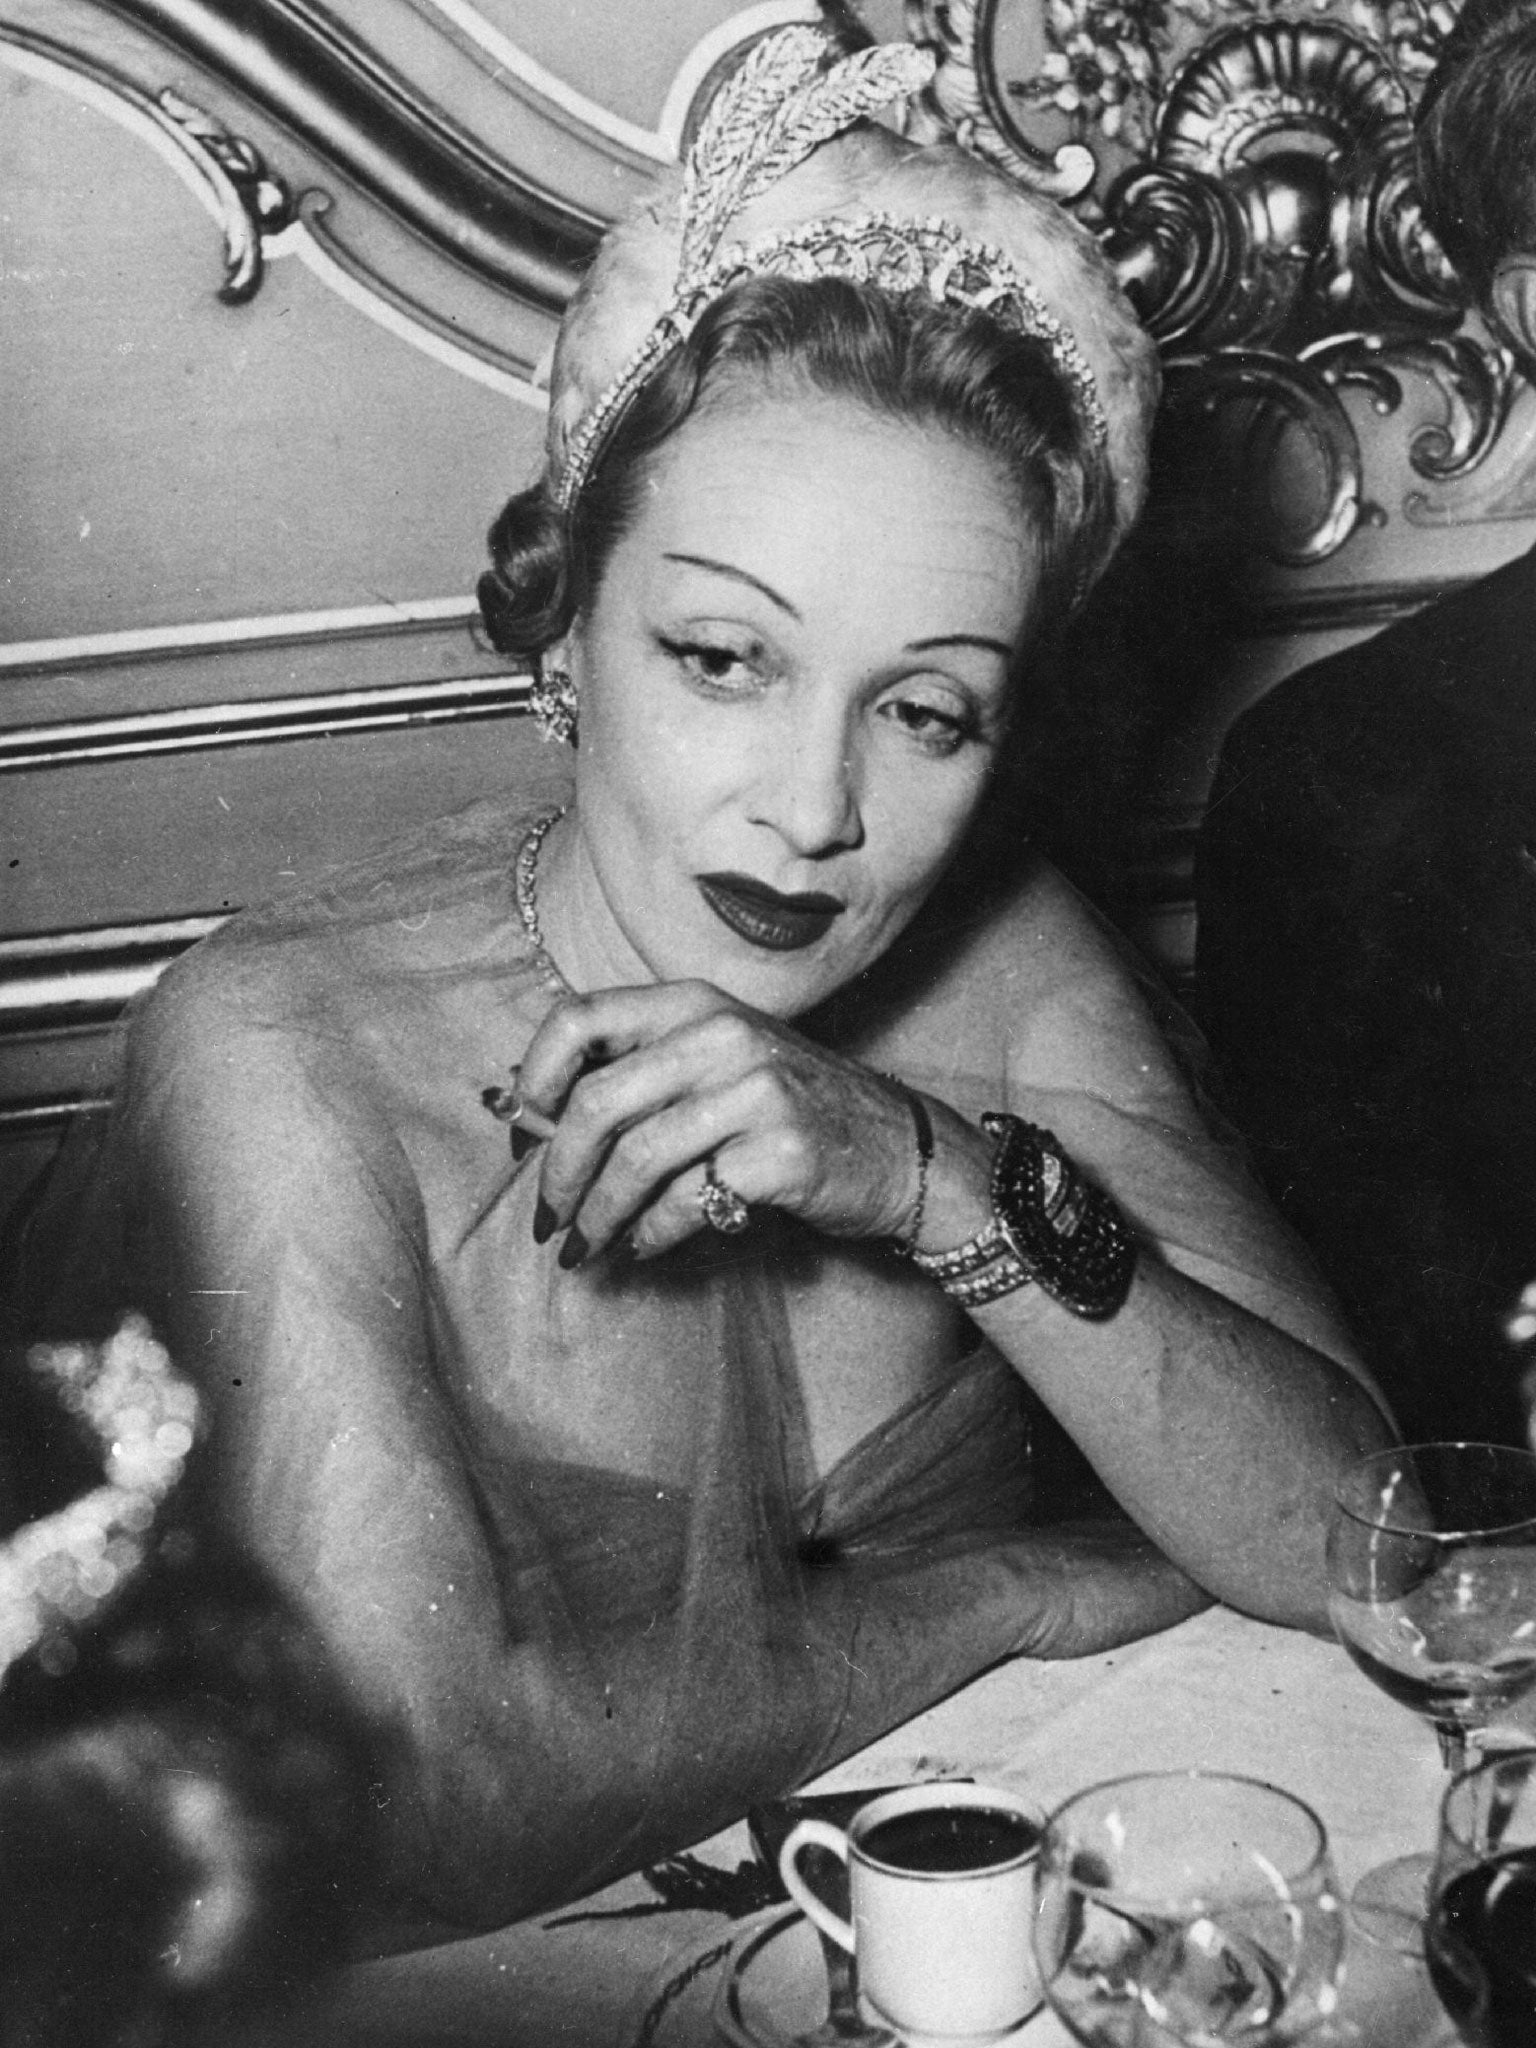 Racy letter from Ernest Hemingway to Marlene Dietrich goes on sale